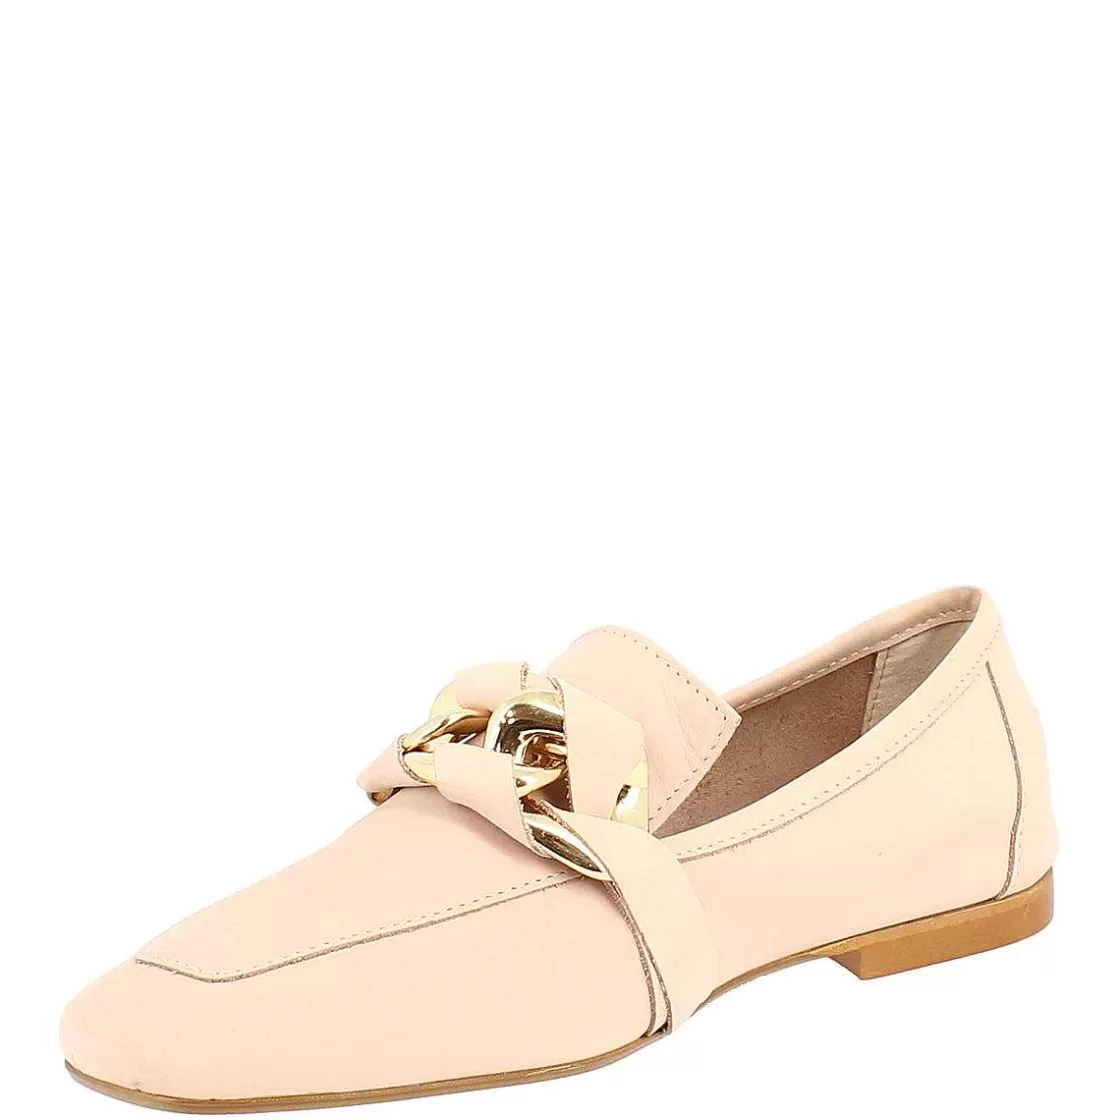 Leonardo Women'S Moccasin In Blush-Colored Nubuck Handmade With Decorated Clamp. Clearance